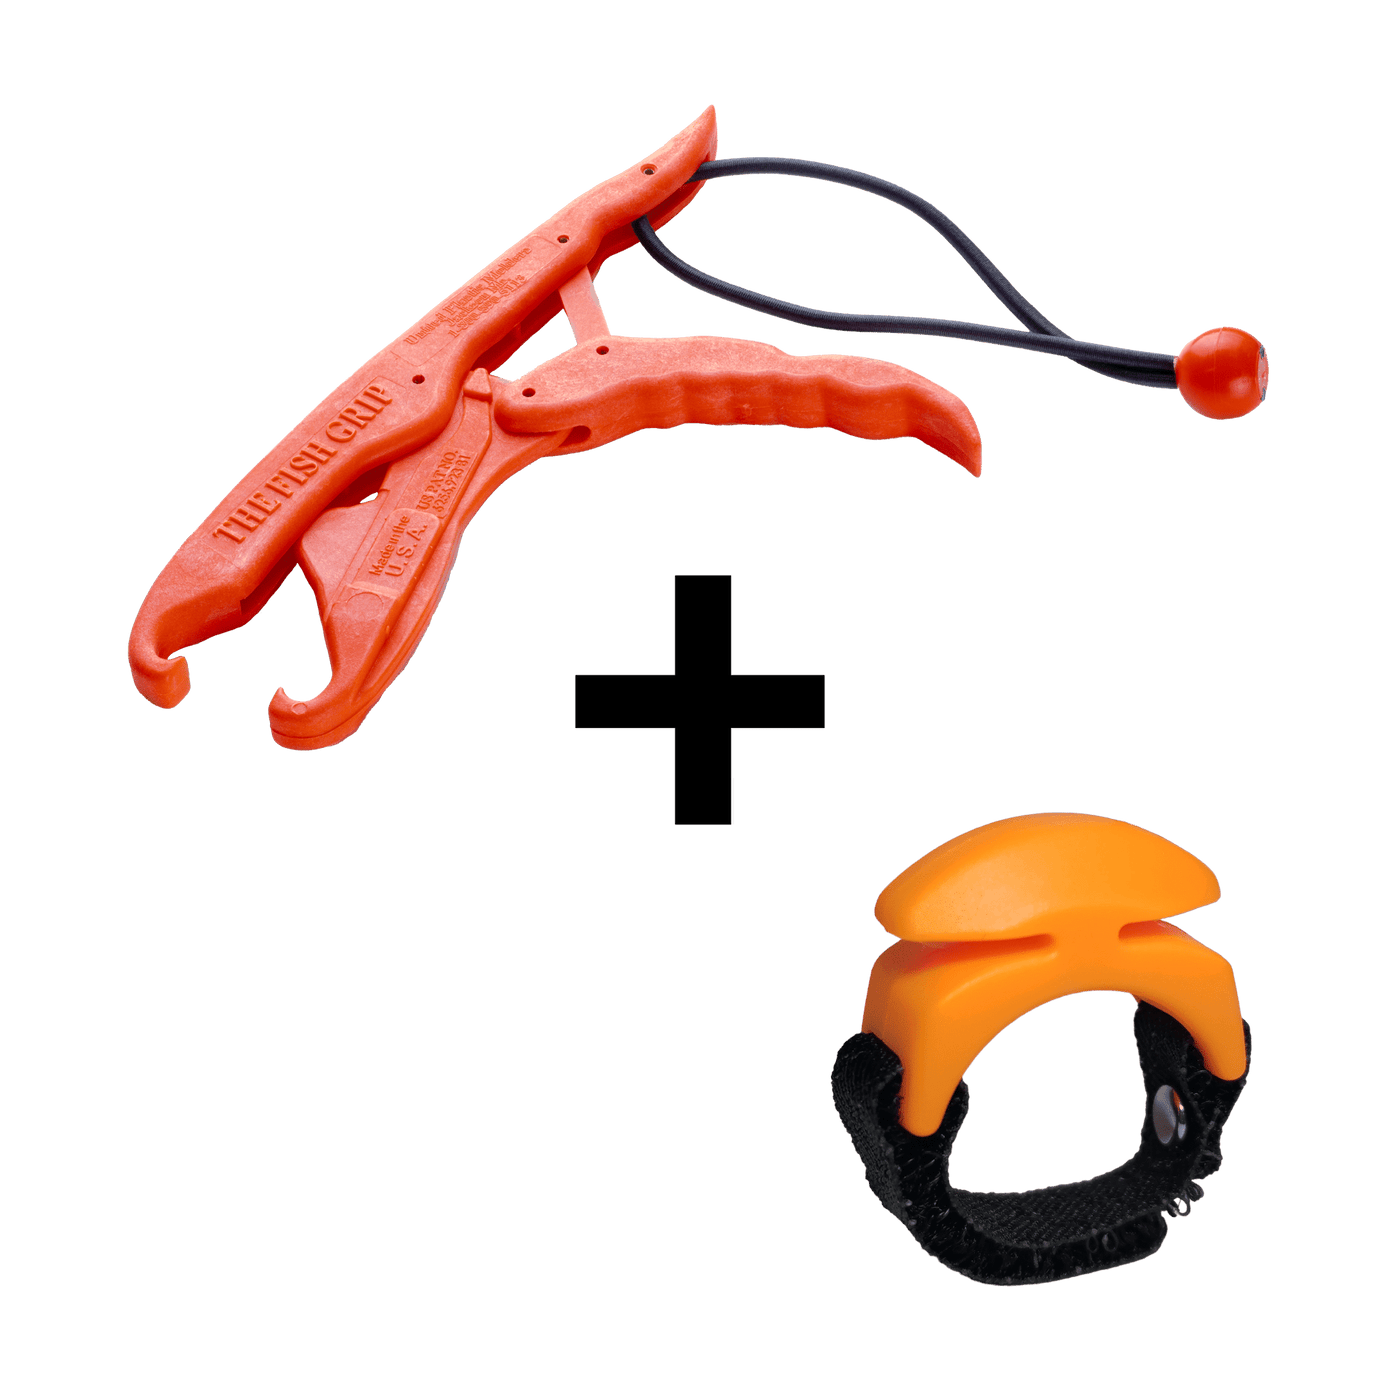 Line Cutterz - The Patented Fishing Line Cutter You Can Wear Or Mount -  Blaze Orange